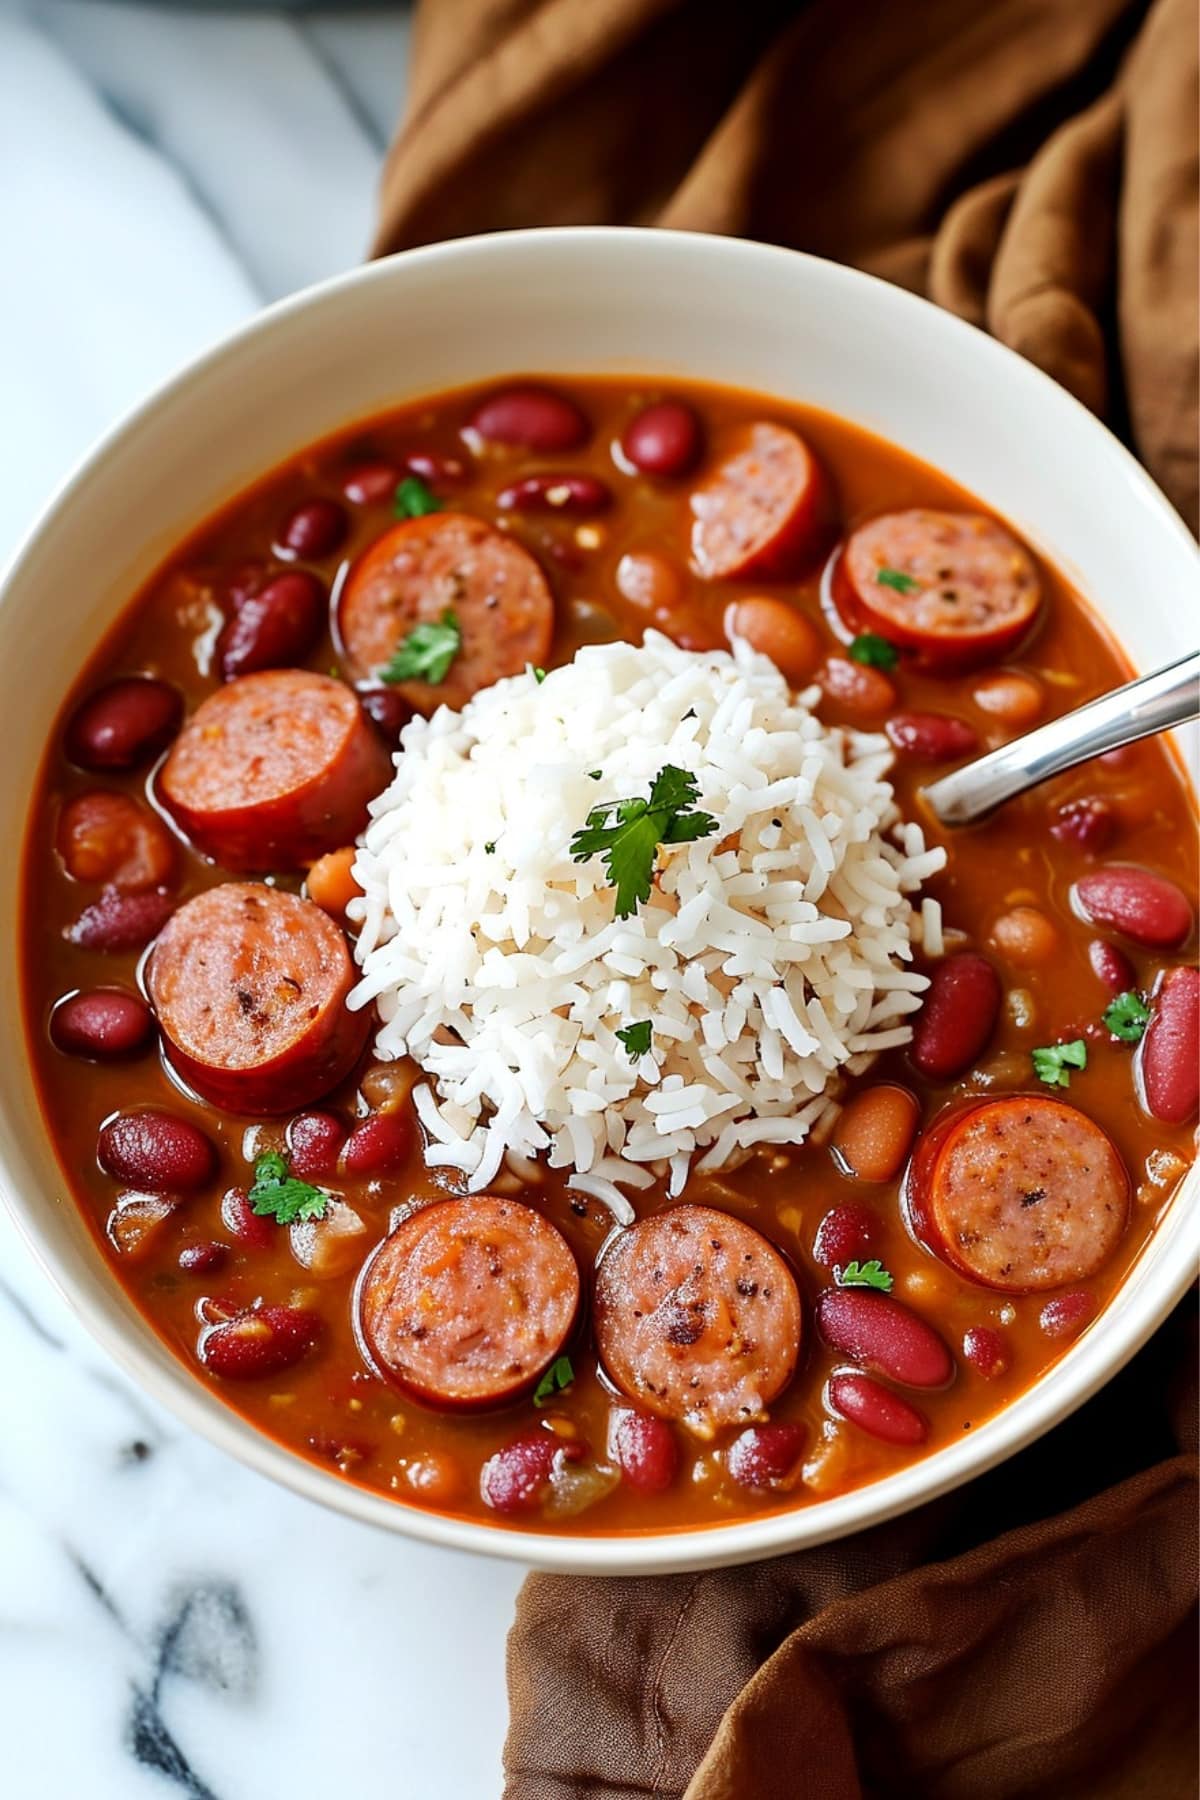 A delicious plate of red beans and rice with sausage, a flavorful and hearty dish